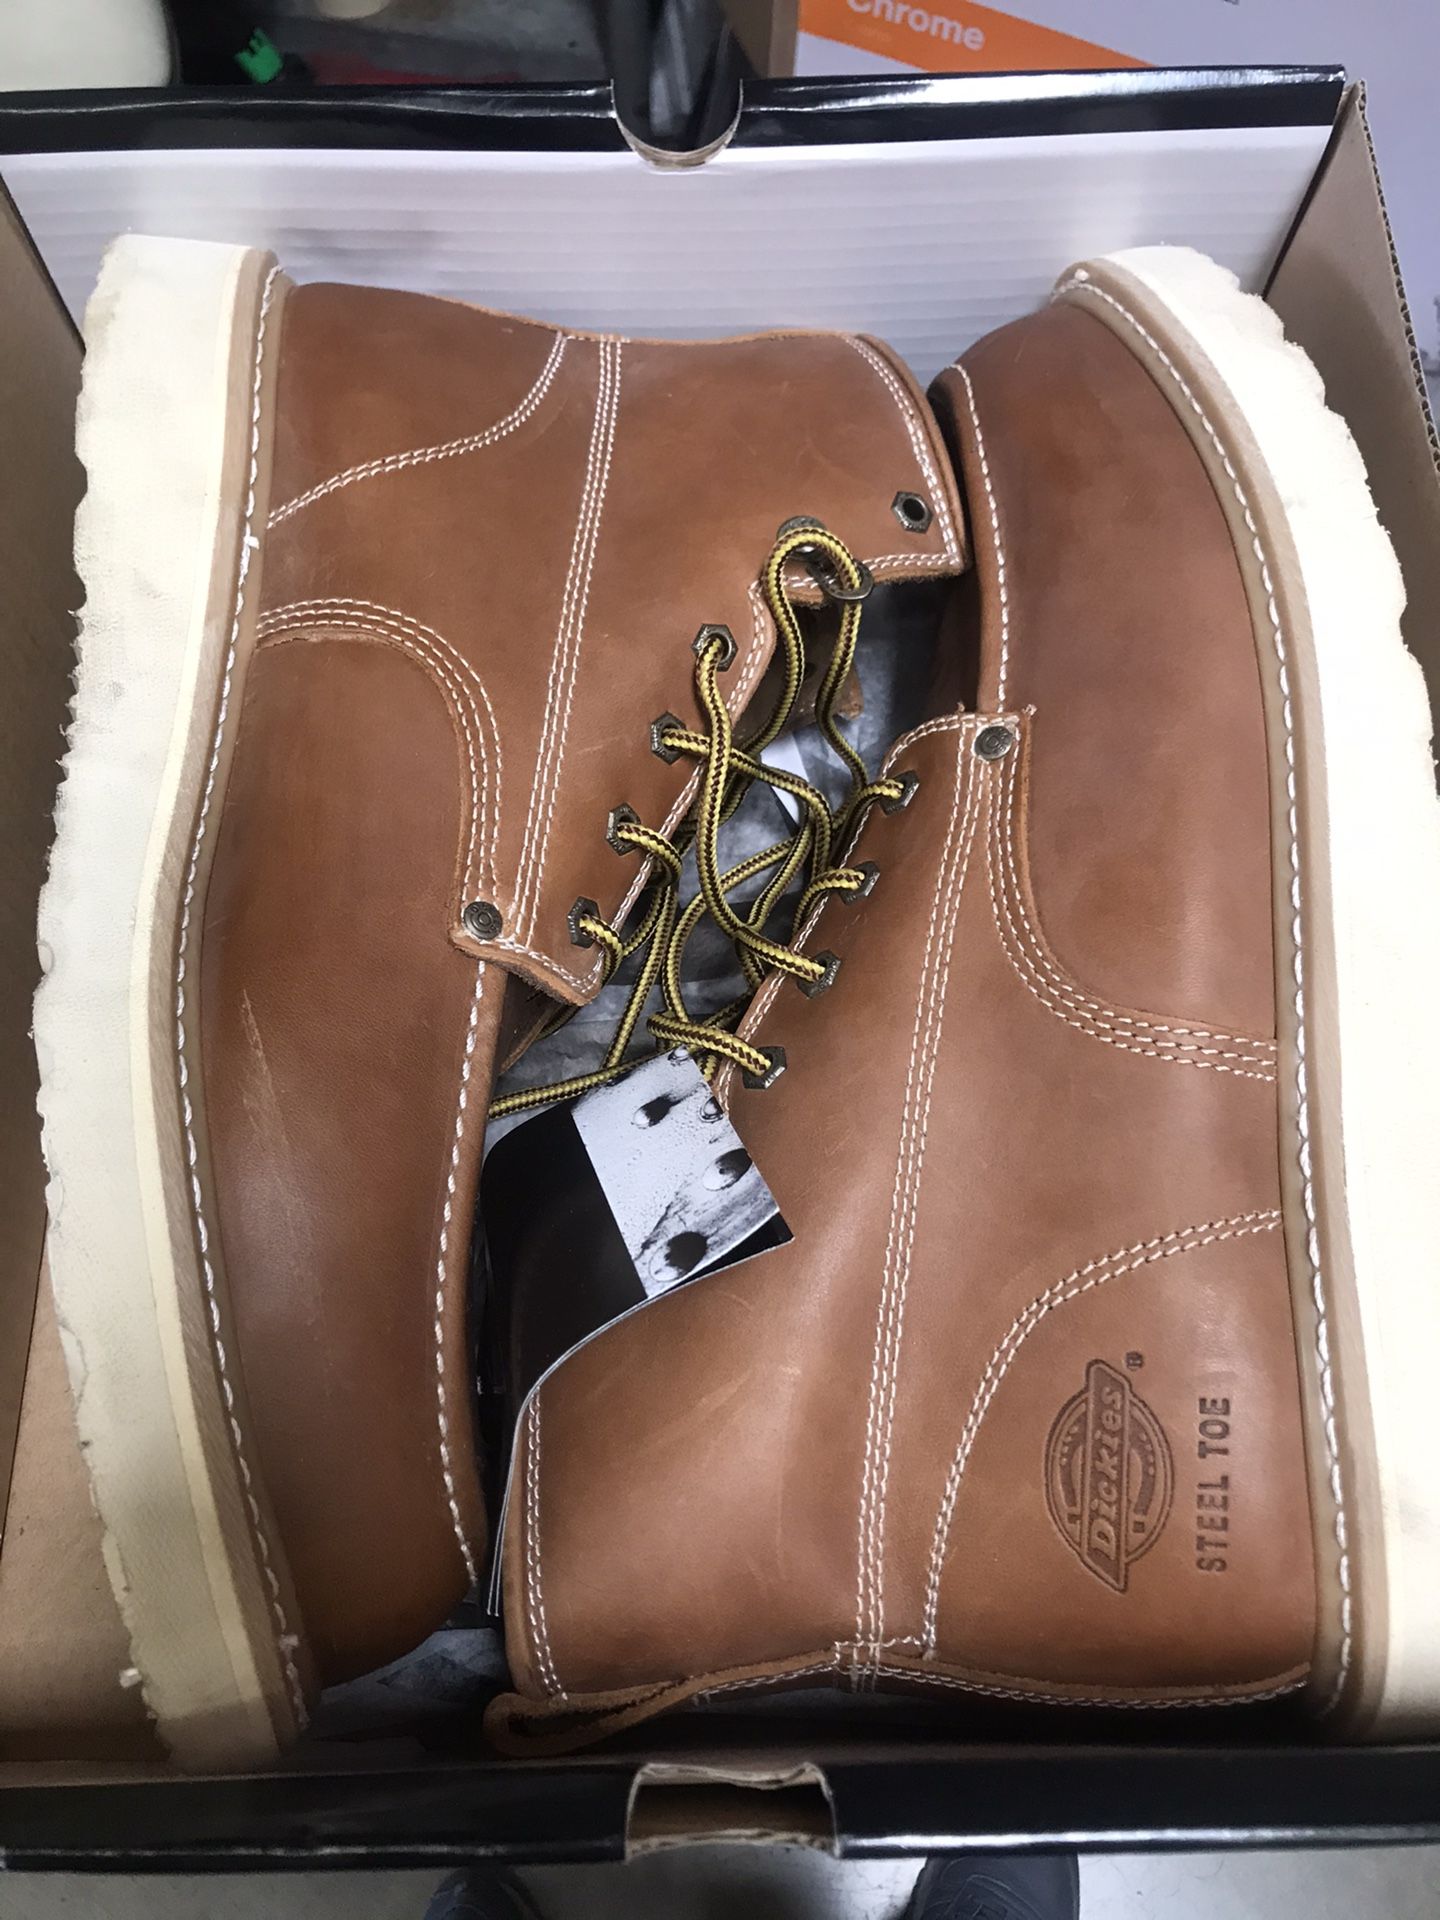 Dickies Men's Trader 6 in. Work Boots - Steel Toe - TAN Size 13(M)